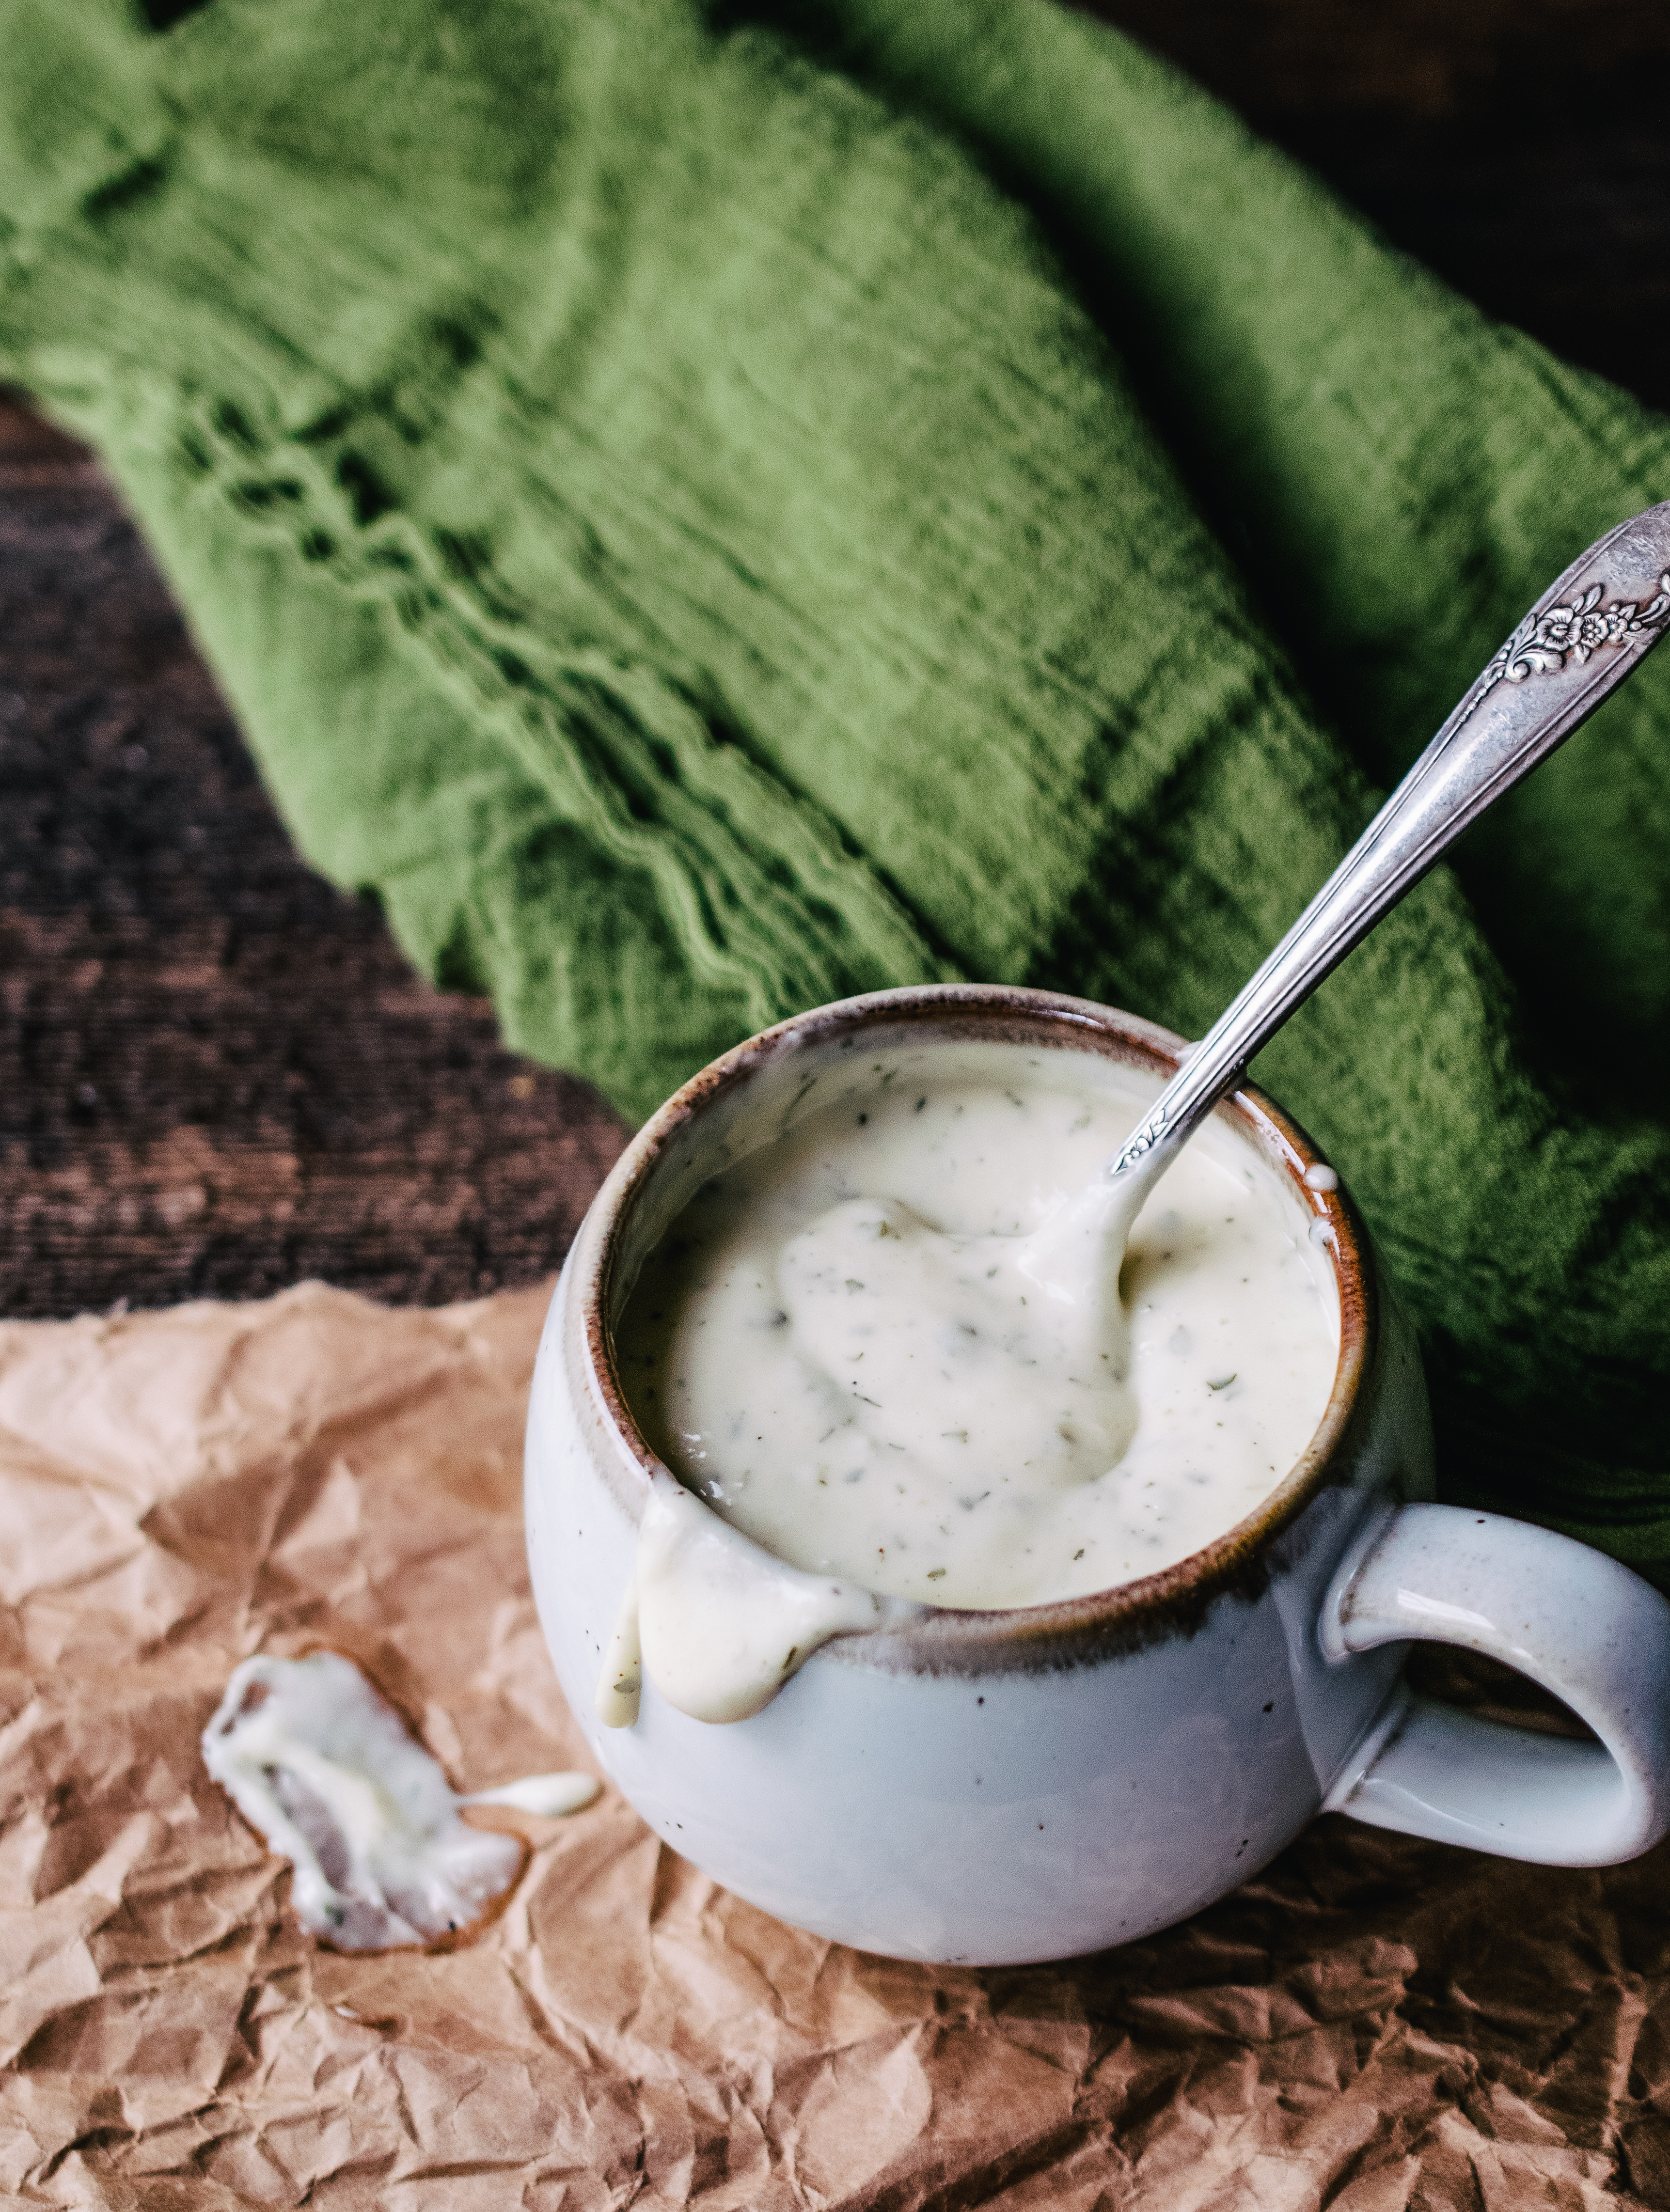 white speckled ceramic mug with brown rim containing homemade ranch dressing dripping down the side with antique silver spoon and green flour sack towel